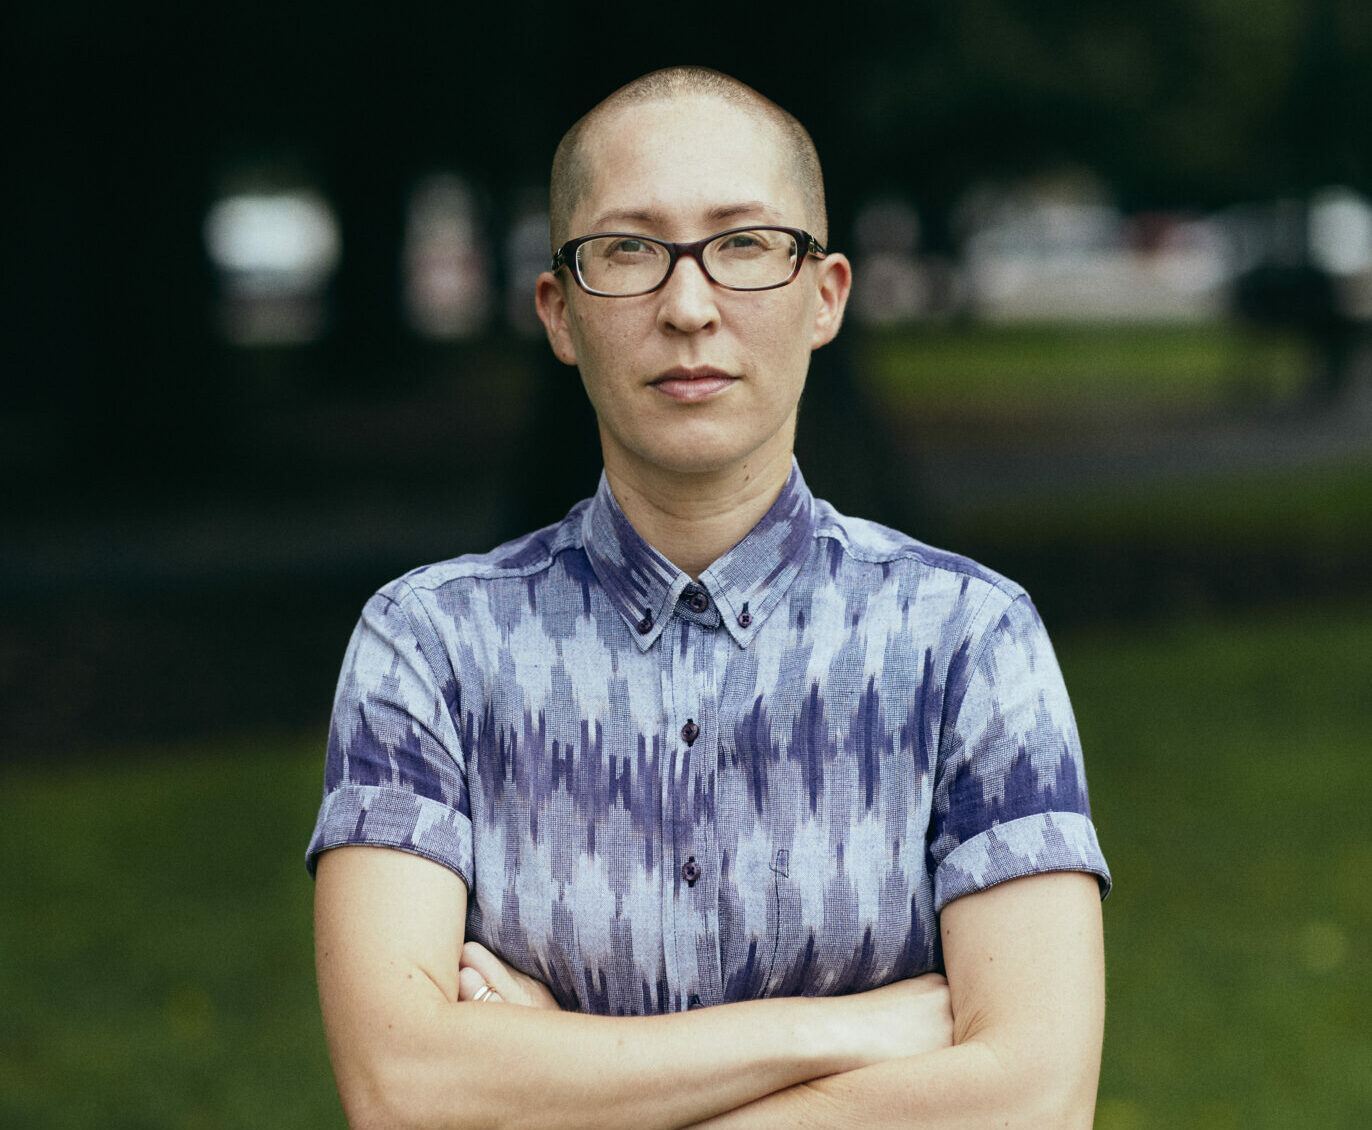 A person with a shaved head and dark-rimmed glasses stands arms-folded and looking directly at the camera